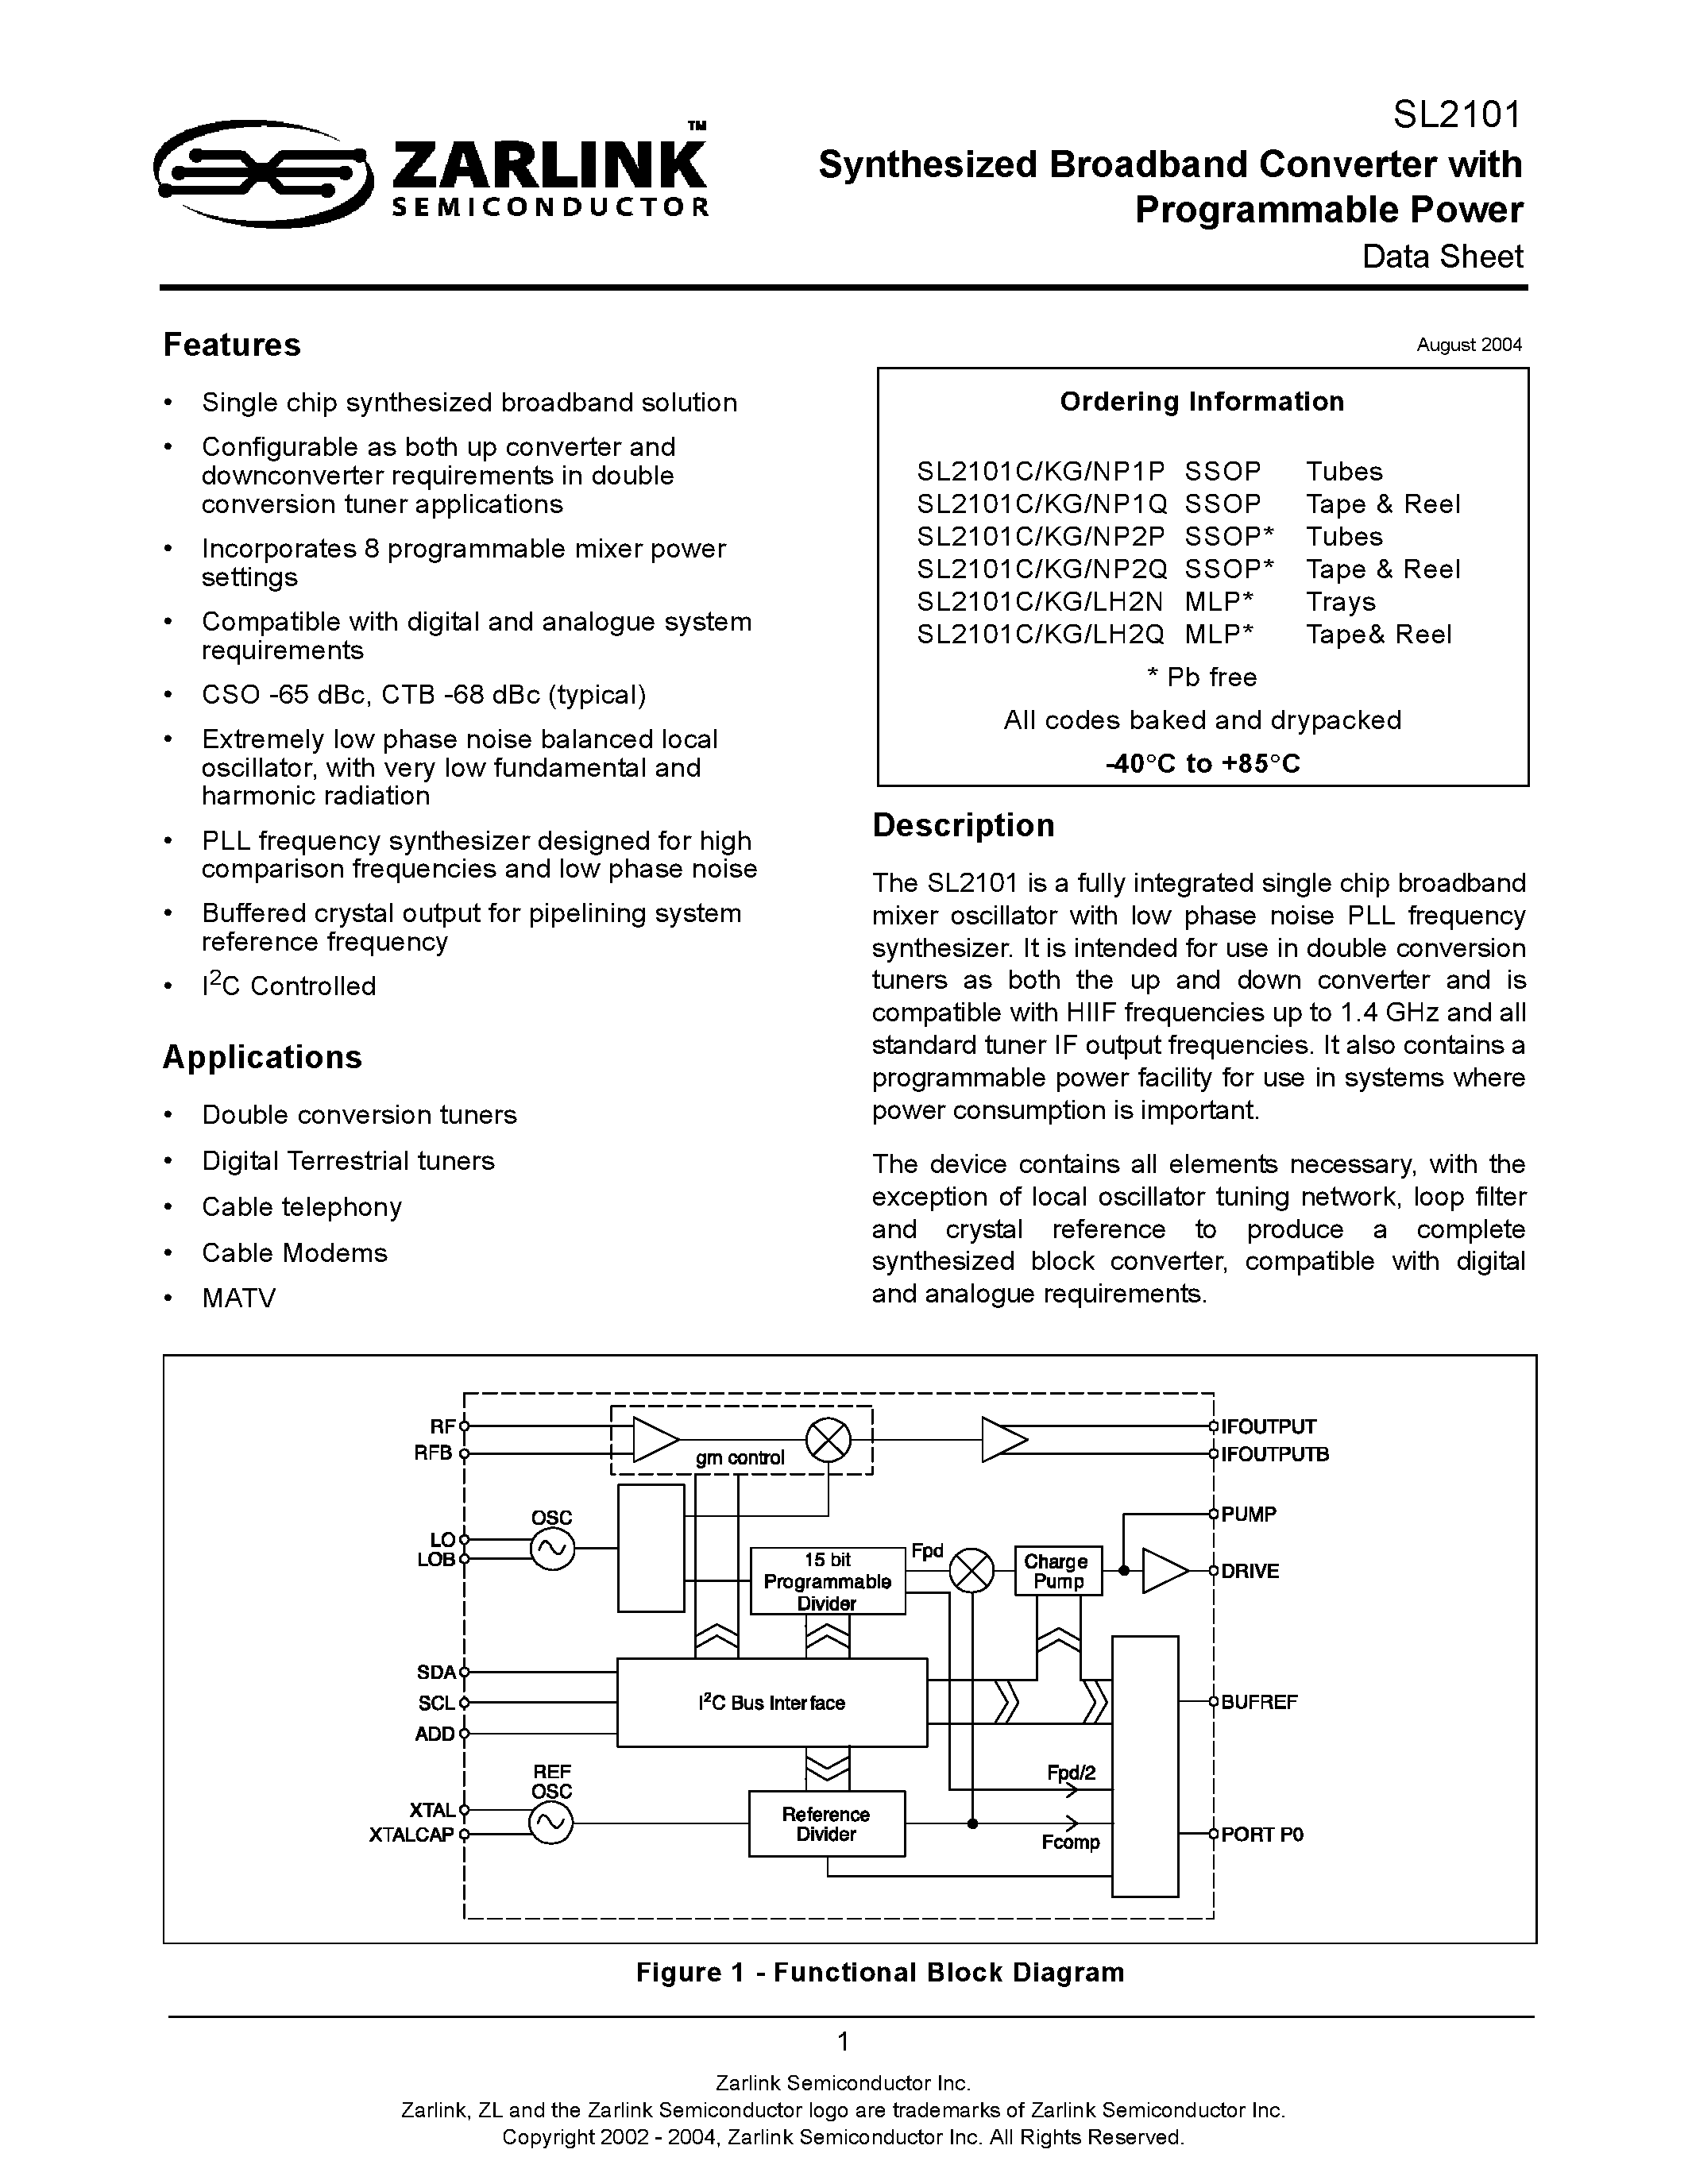 Datasheet SL2101 - Synthesized Broadband Converter with Programmable Power page 1